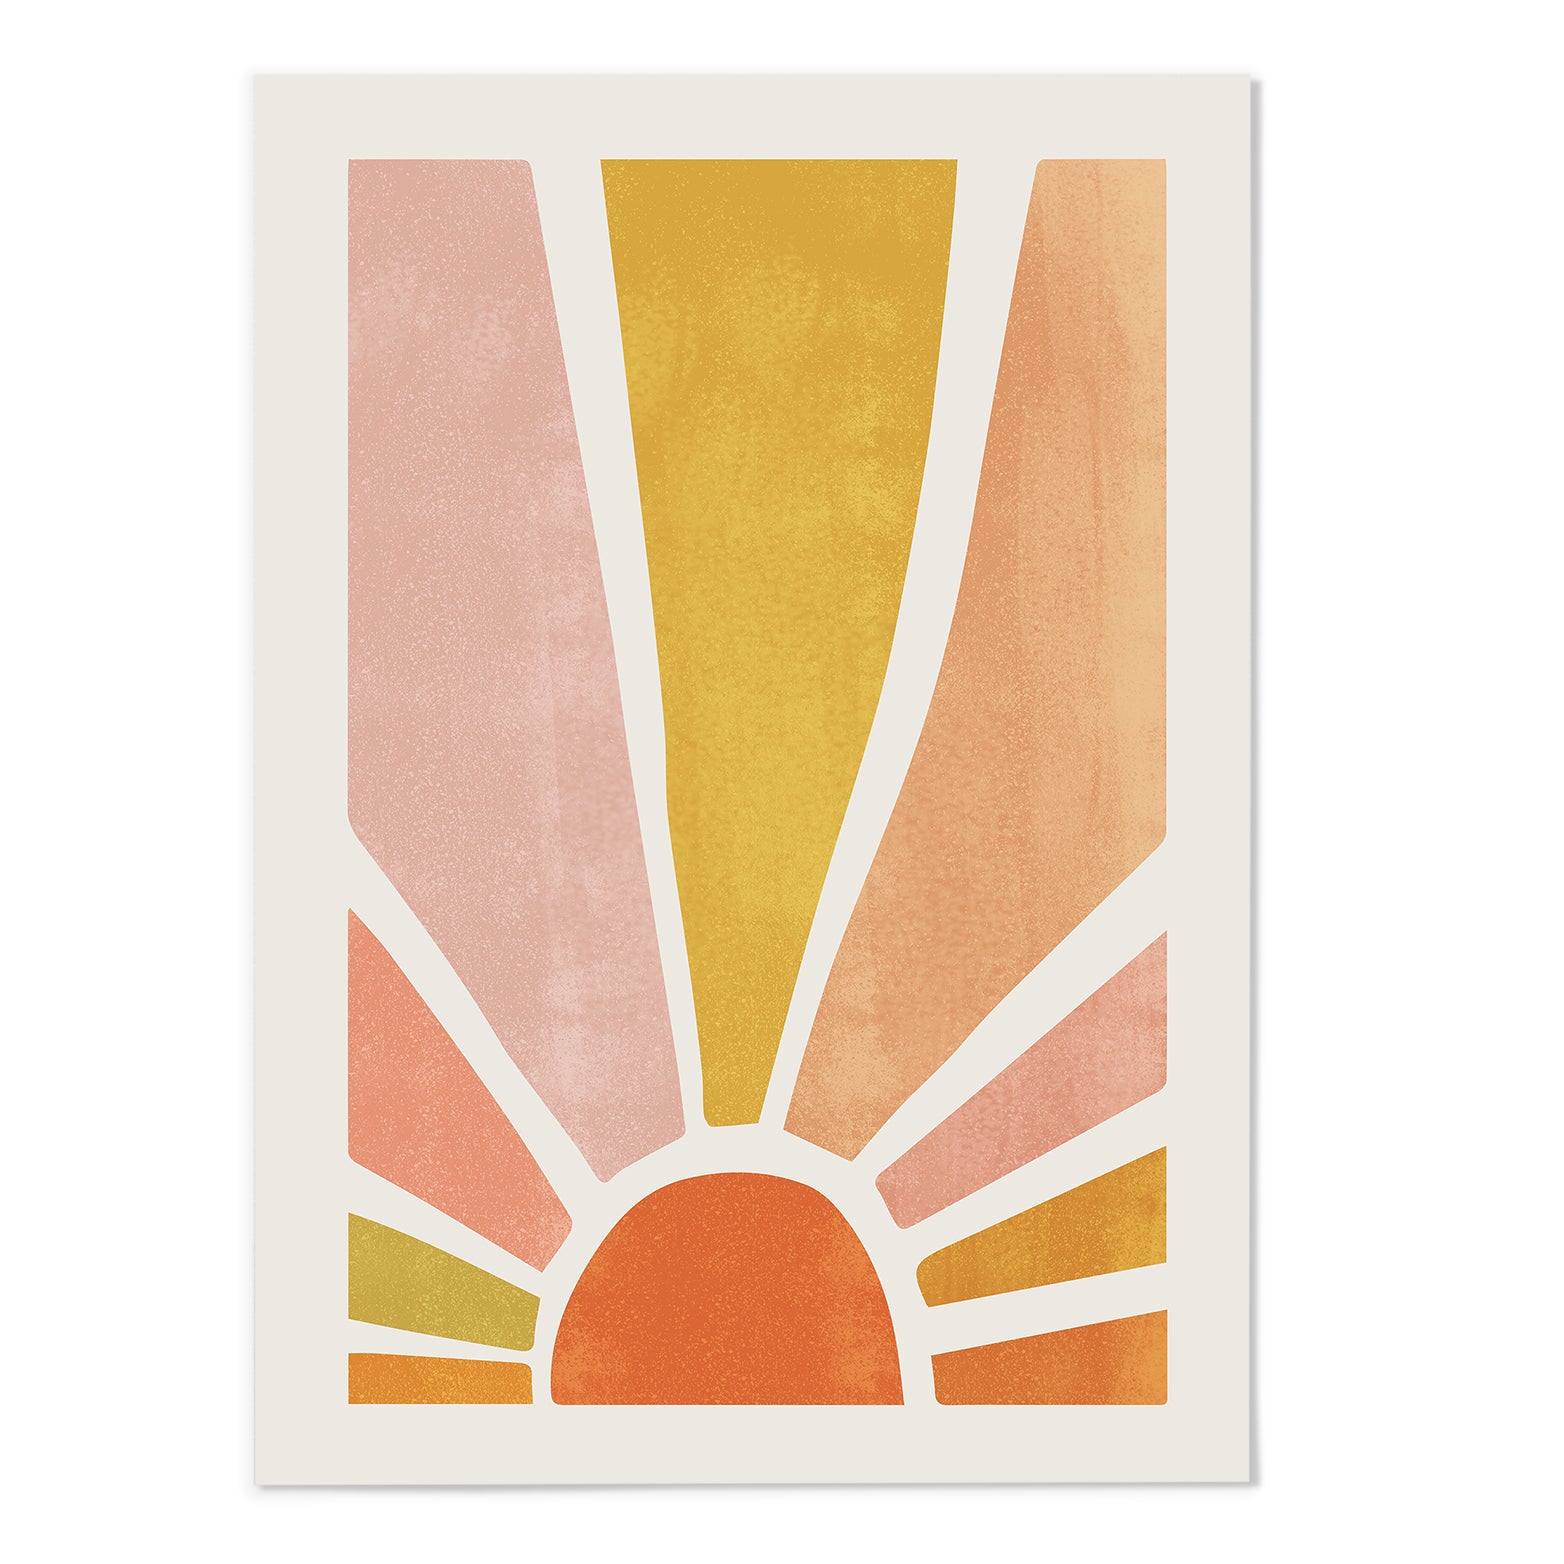 You Are My Sunshine Gallery Wall Art Set